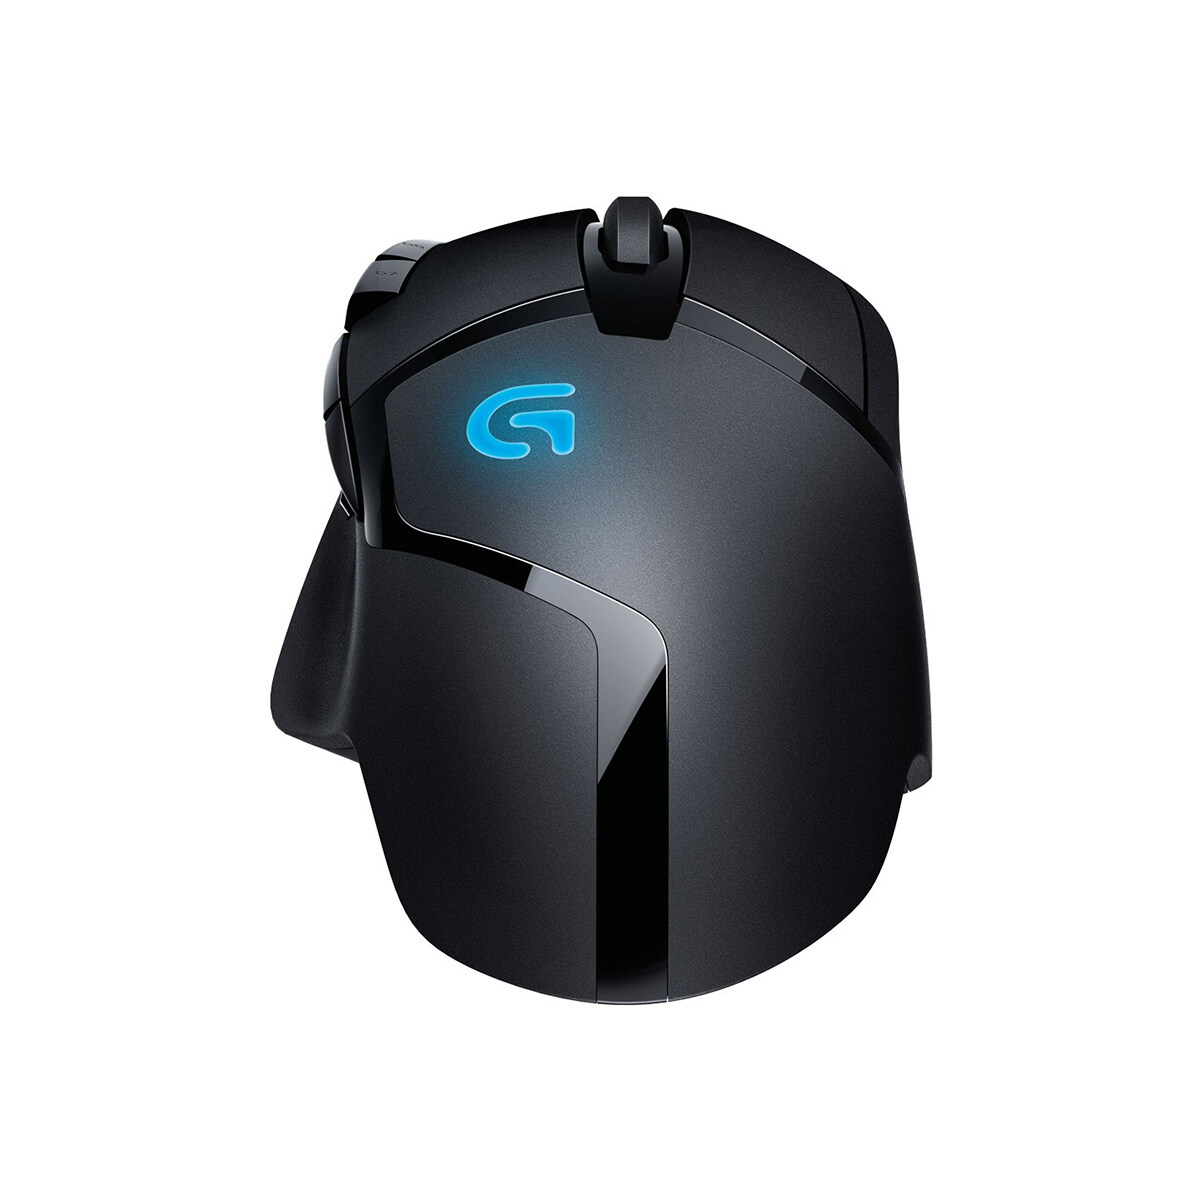 Logitech G402 Hyperion Fury FPS Wired Gaming Mouse with Fusion Engine High-Speed Tracking, 8 Programmable Buttons, 32-Bit Arm Processor (910-004070)